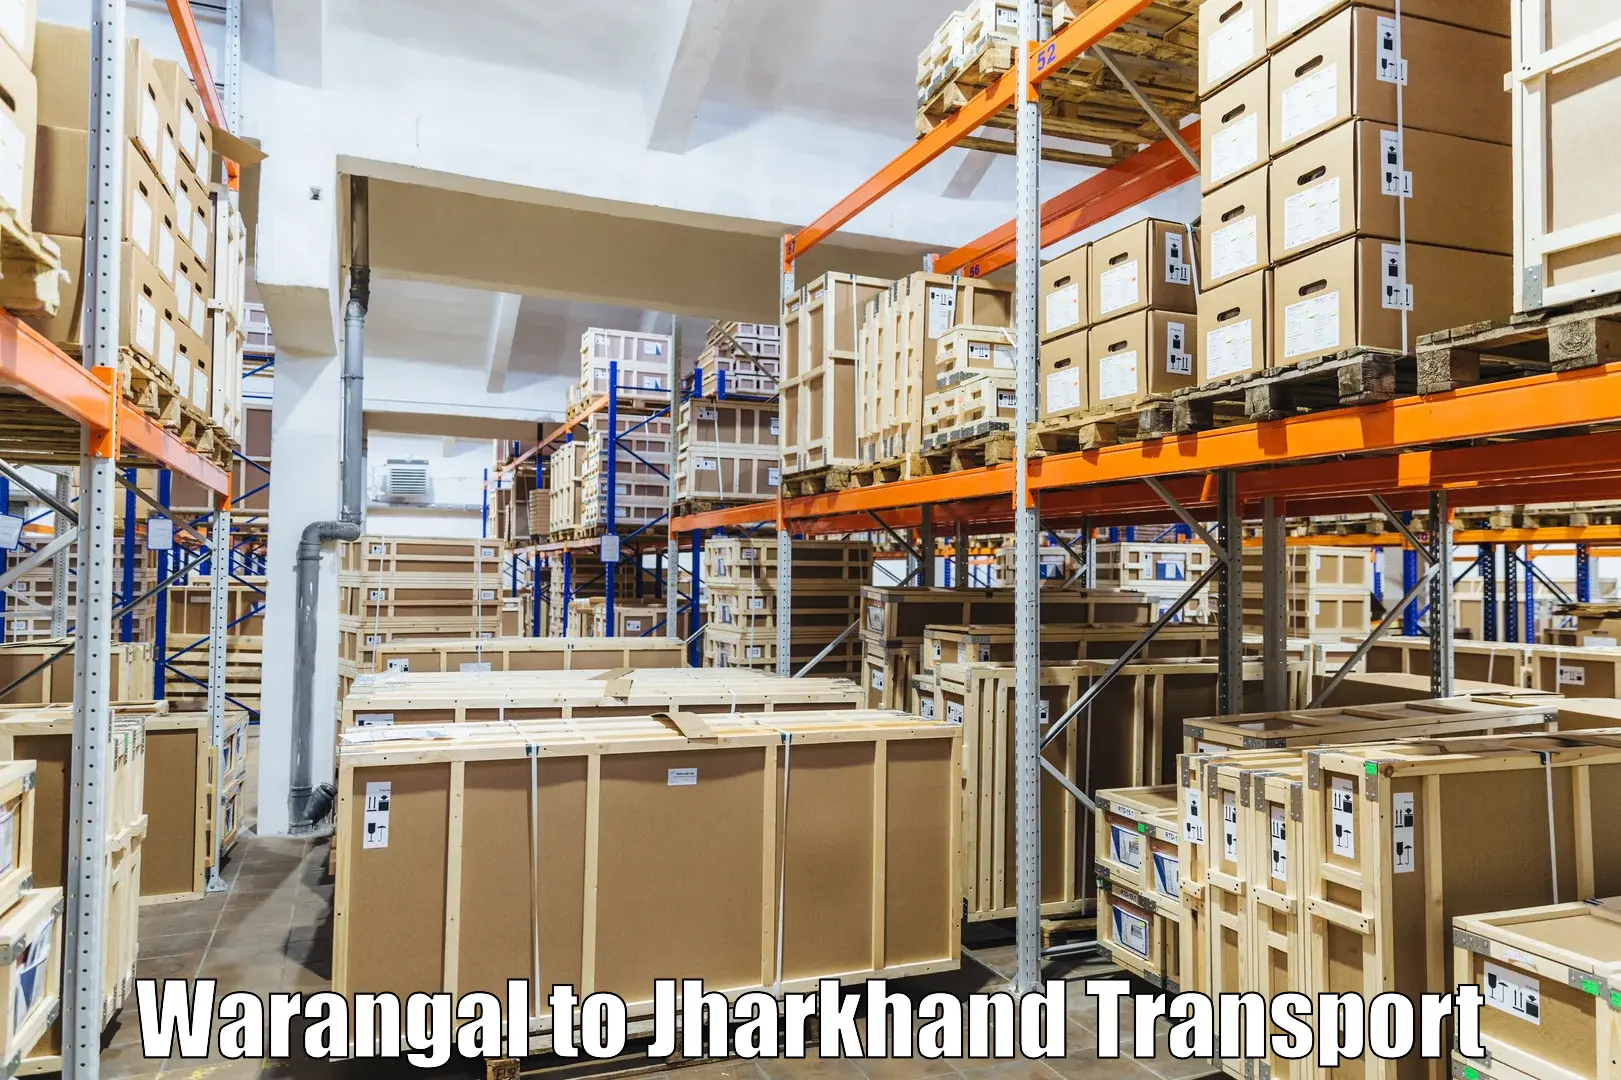 Commercial transport service Warangal to IIT Dhanbad